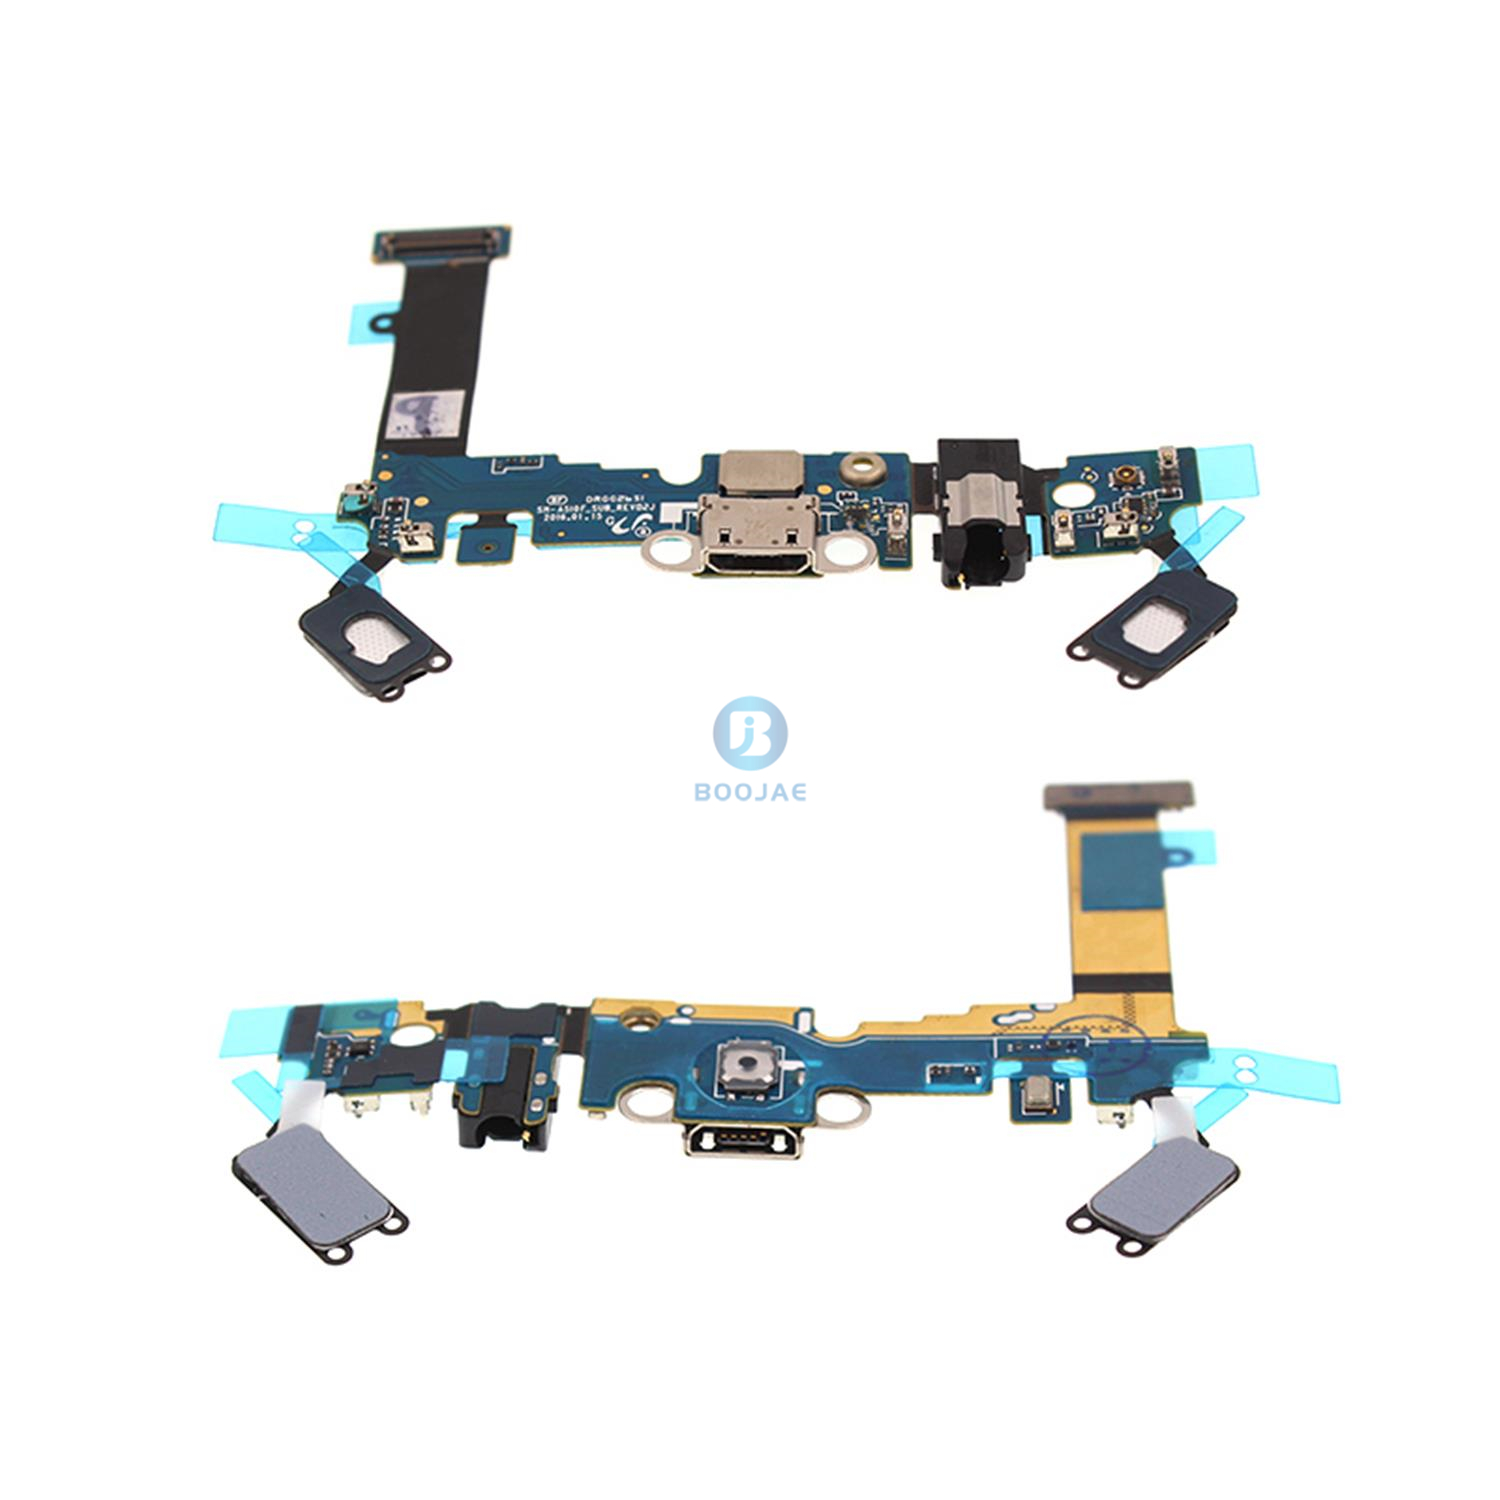 For Samsung A5 2016 Charging Port Dock Flex Cable